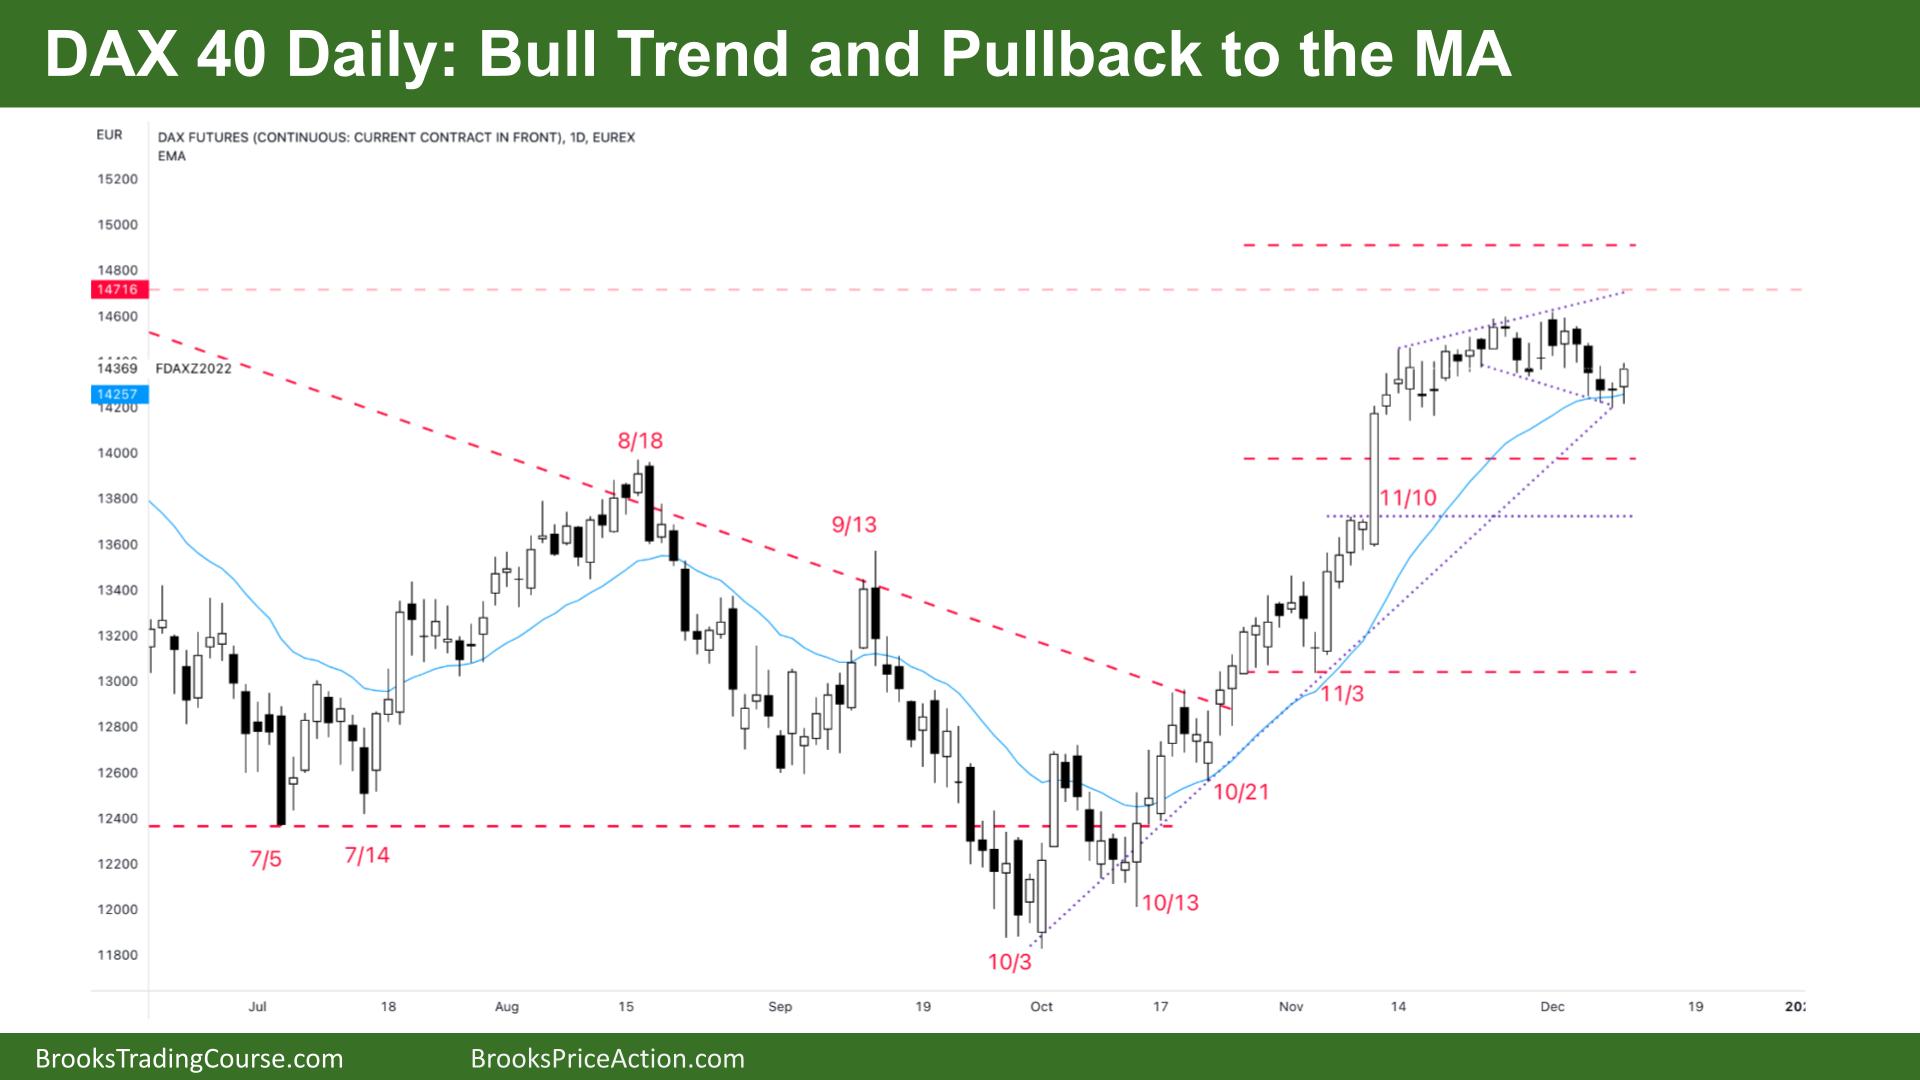 DAX 40 Bull Trend and Pullback to the MA